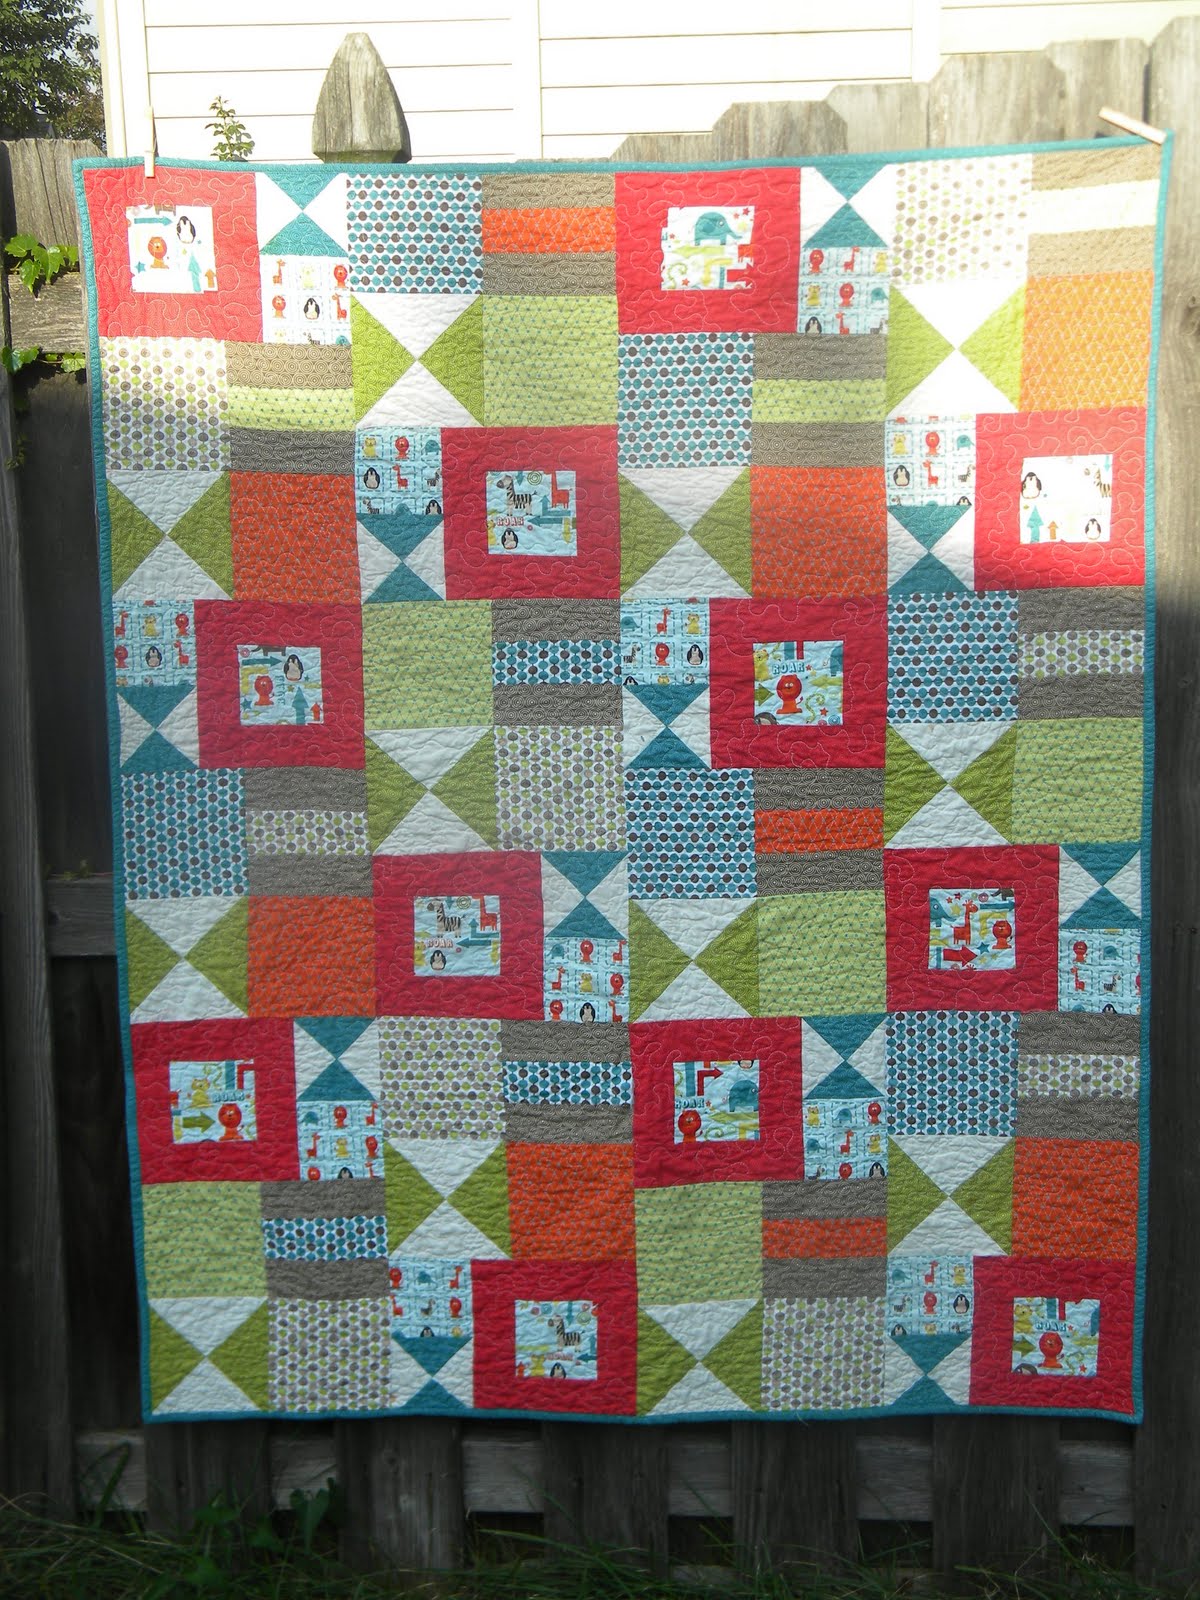 Made by Miss Jill: Bizzy kid Quilt